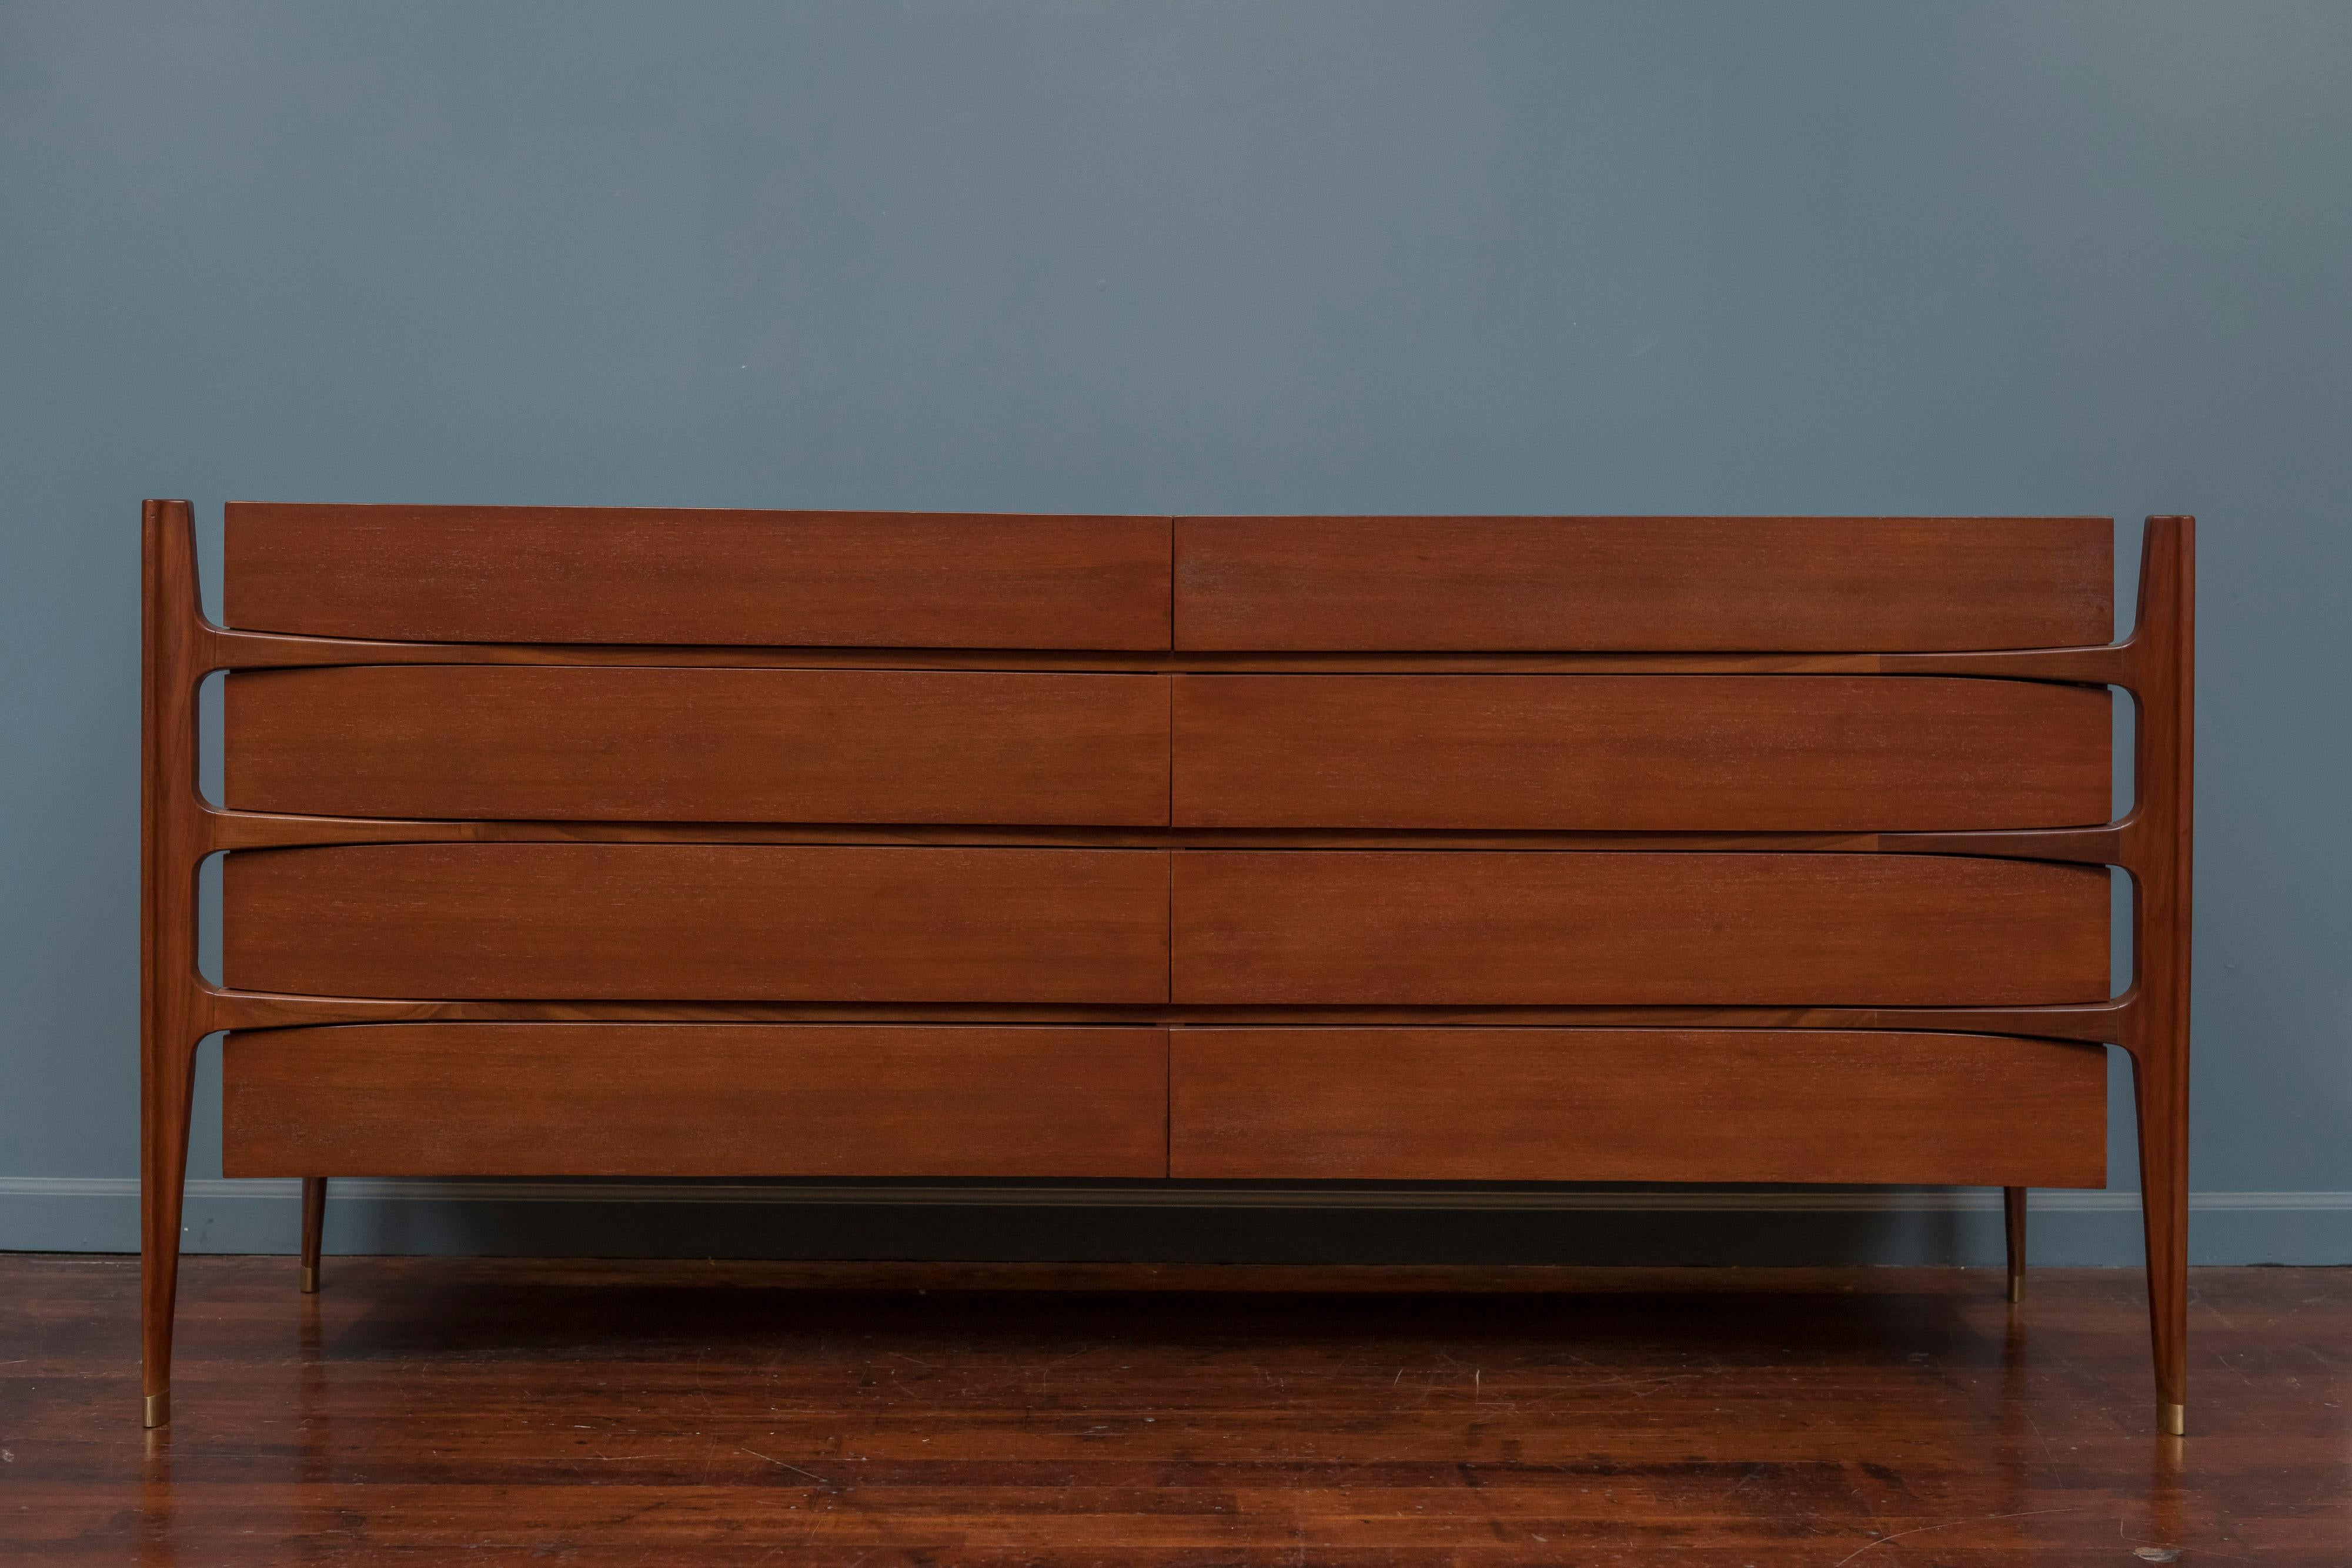 A spectacular circa 1950 sculptural eight-drawer dresser in walnut by William Hinn for Urban Furniture, and realized by Swedish Furniture Guild. Exposed biomorphic frame of exquisitely hand-sculpted solid walnut intersects and supports a beautifully